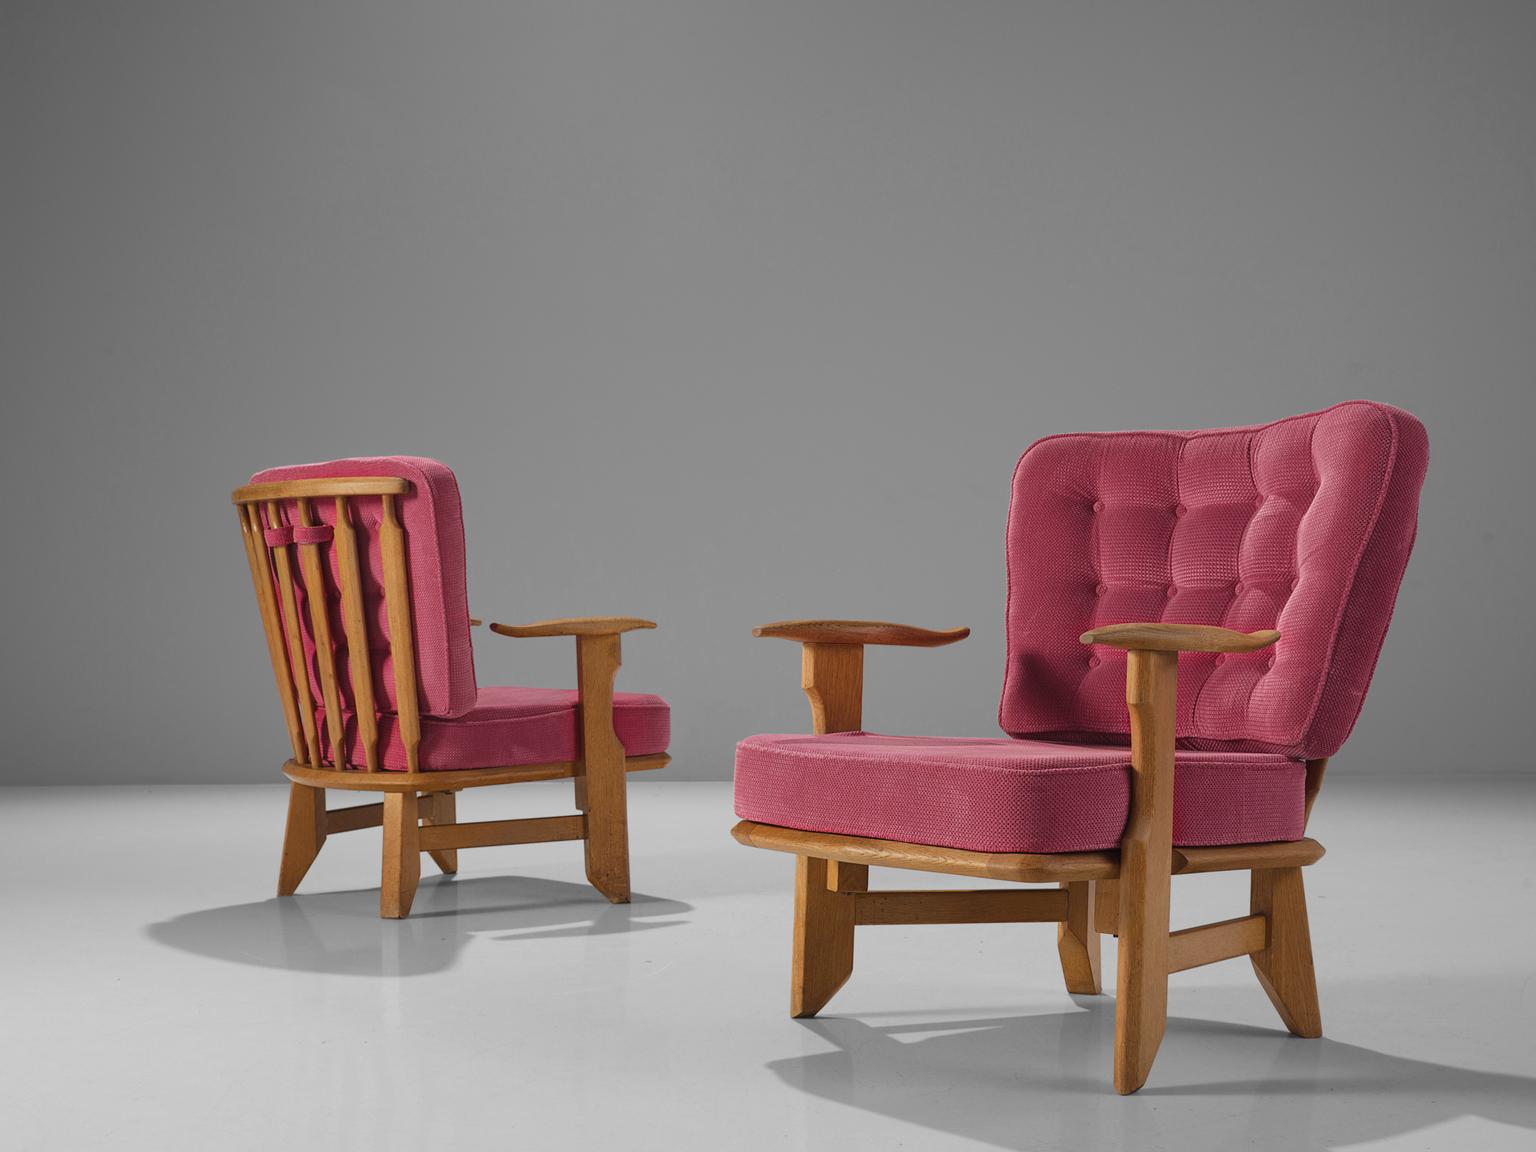 Guillerme et Chambron, pair of lounge chairs, pink fabric, oak, France, 1950s

These sculptural easy chairs are designed by Guillerme et Chambron. They are known for their high quality solid oak furniture, off which this is no exception. These